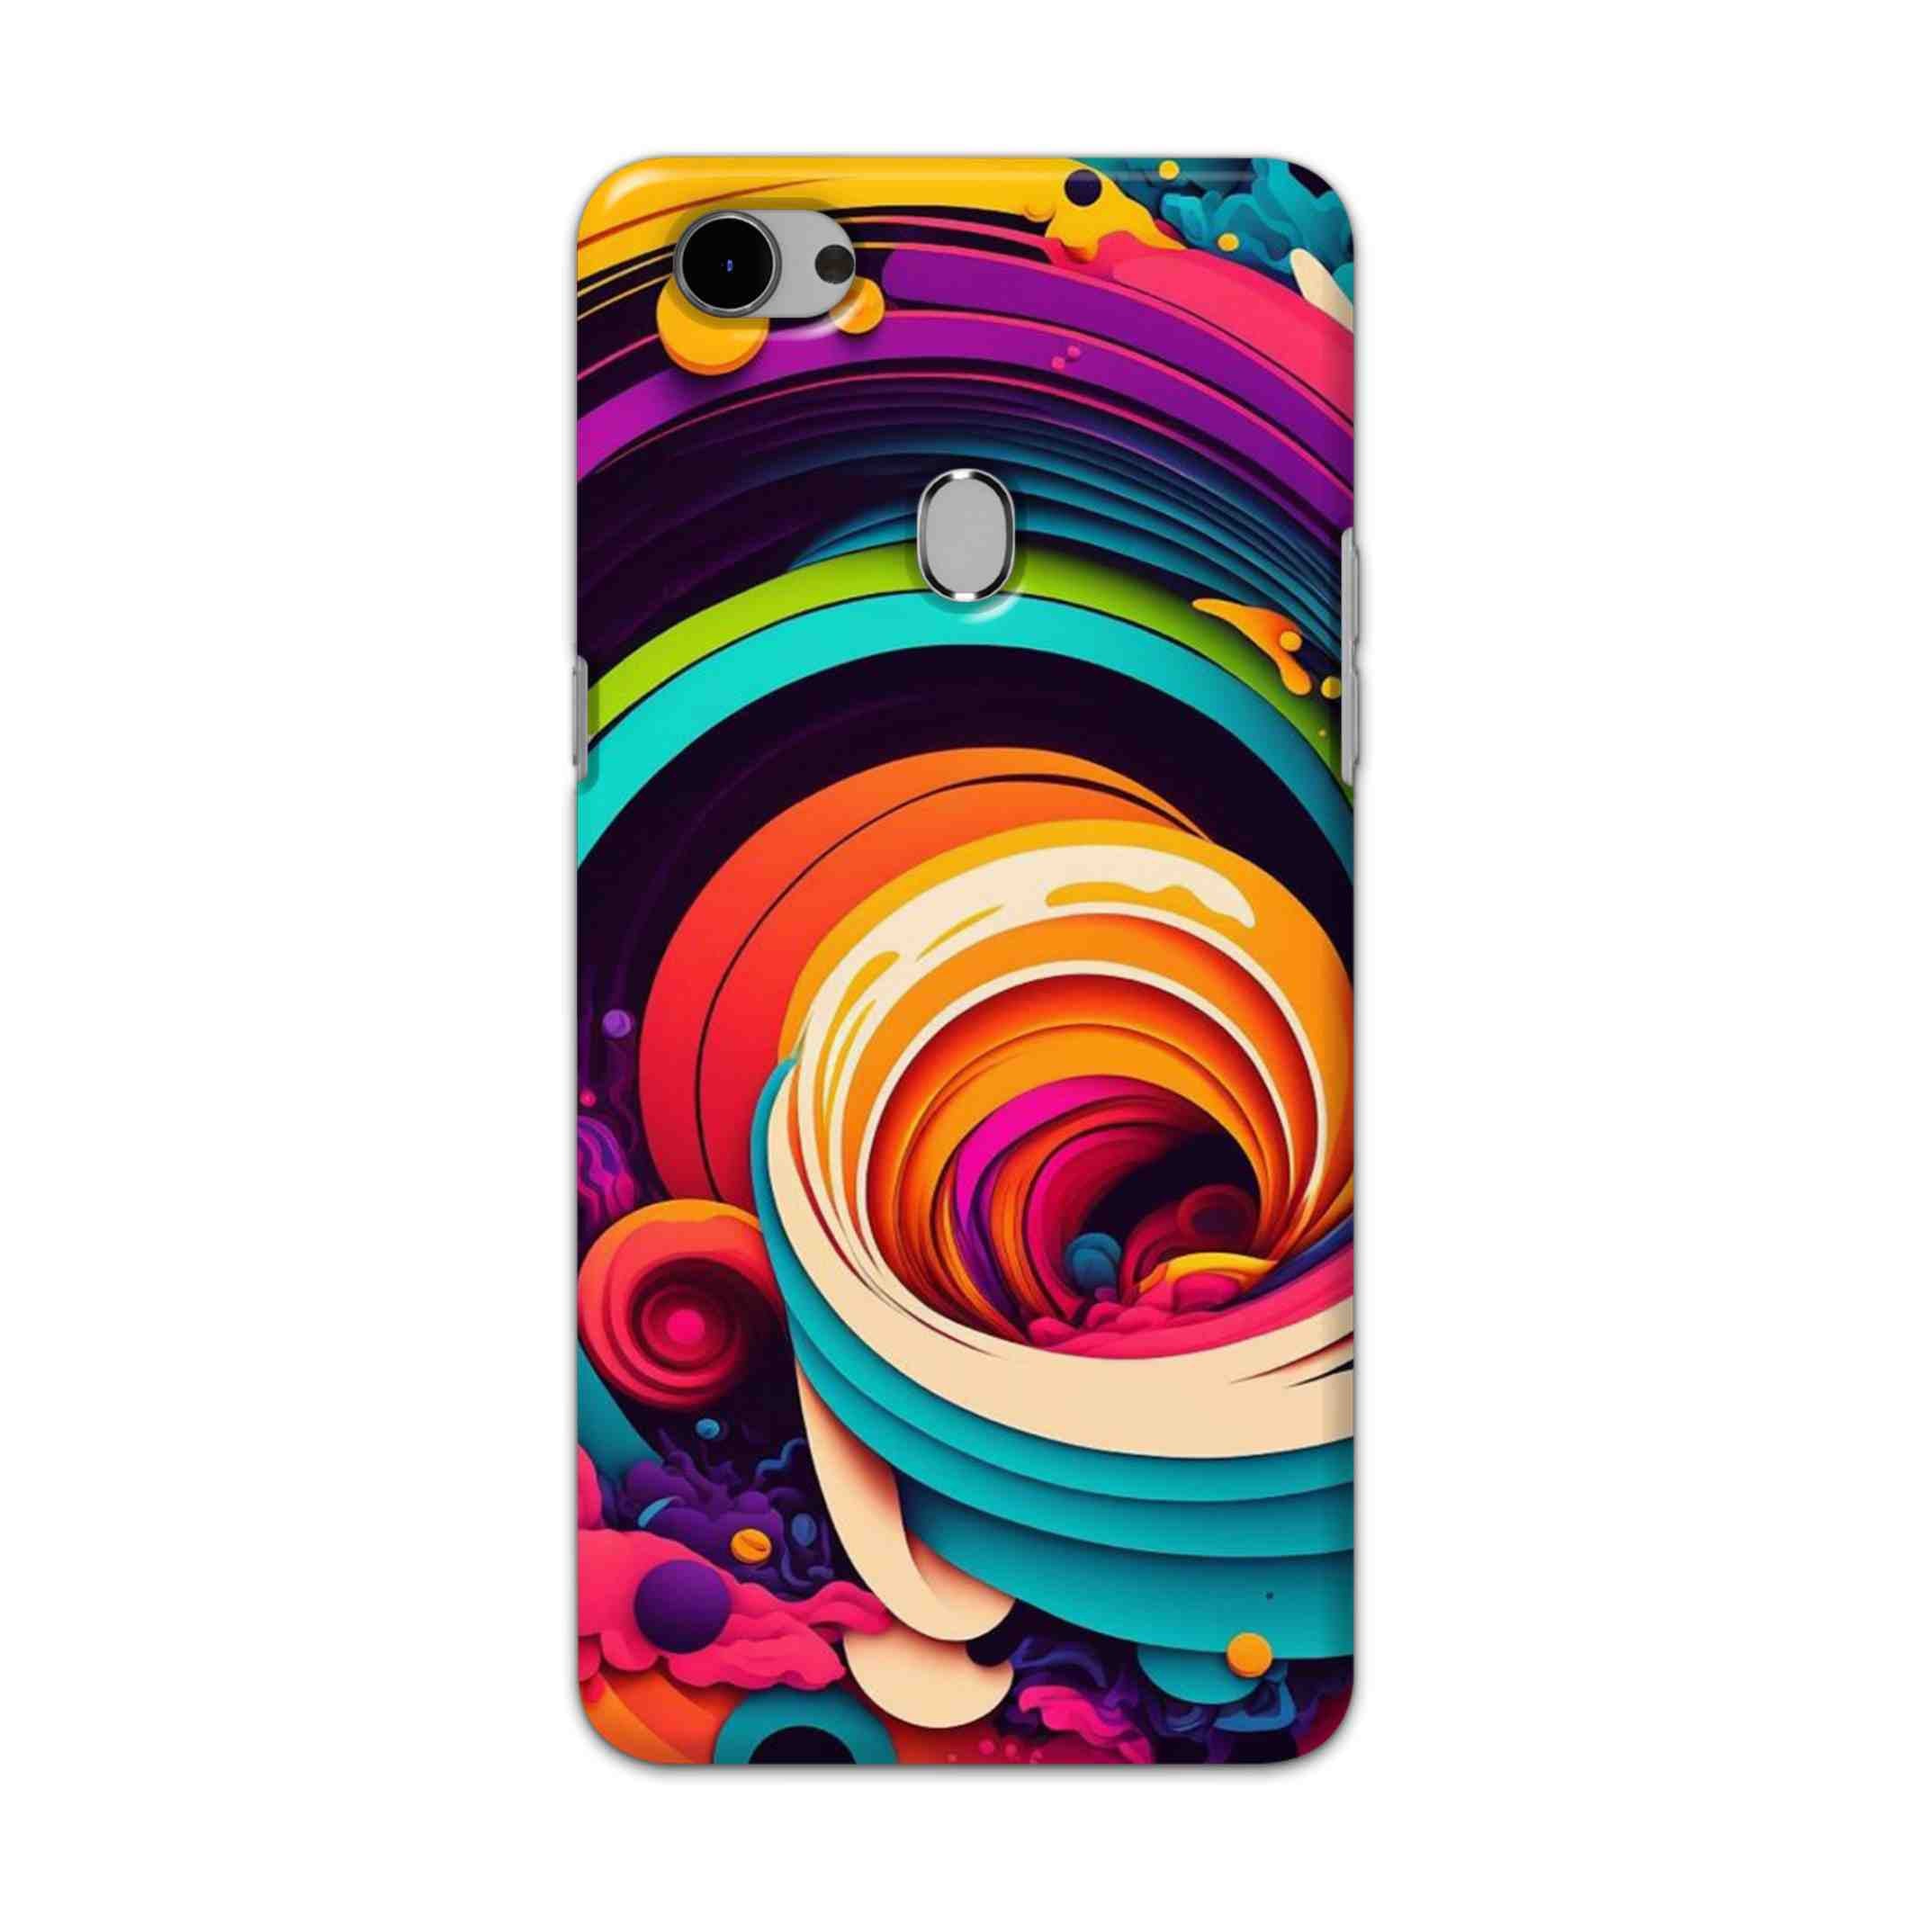 Buy Colour Circle Hard Back Mobile Phone Case Cover For Oppo F7 Online